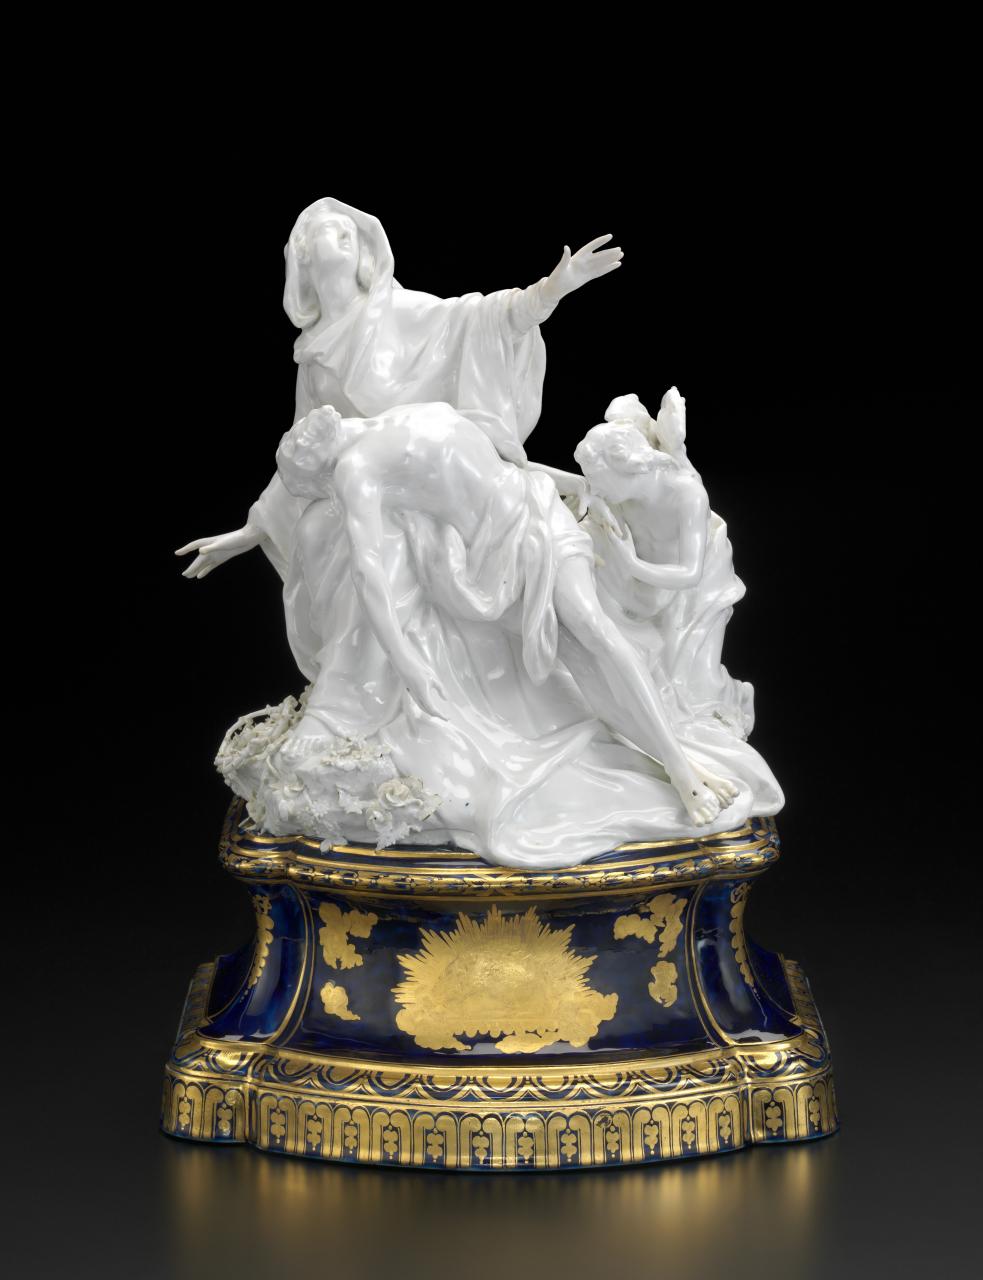 Chelsea Porcelain Factory, London (manufacturer) England c.1744–69 Joseph Willems (designer) Flanders/England c.1715–66 Pietà c.1761 (detail) porcelain (soft-paste) 38.5 x 28.5 x 22.8 cm National Gallery of Victoria, Melbourne Purchased through The Art Foundation of Victoria with the assistance of the Alcoa Foundation, Governor, 1989 (D2-1989)